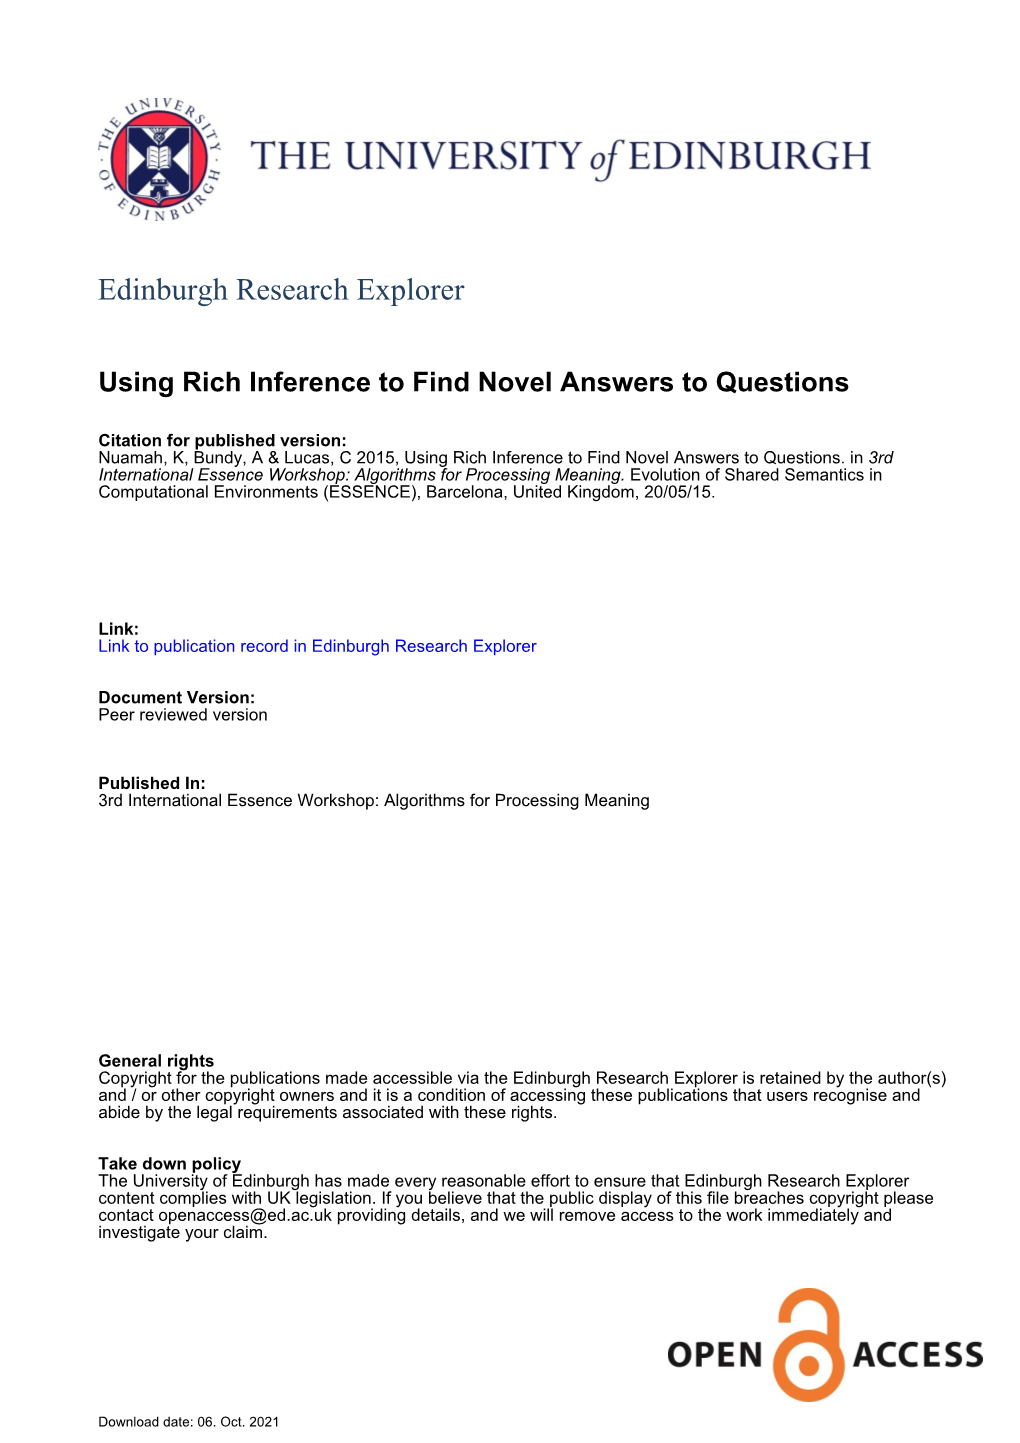 Using Rich Inference to Find Novel Answers to Questions